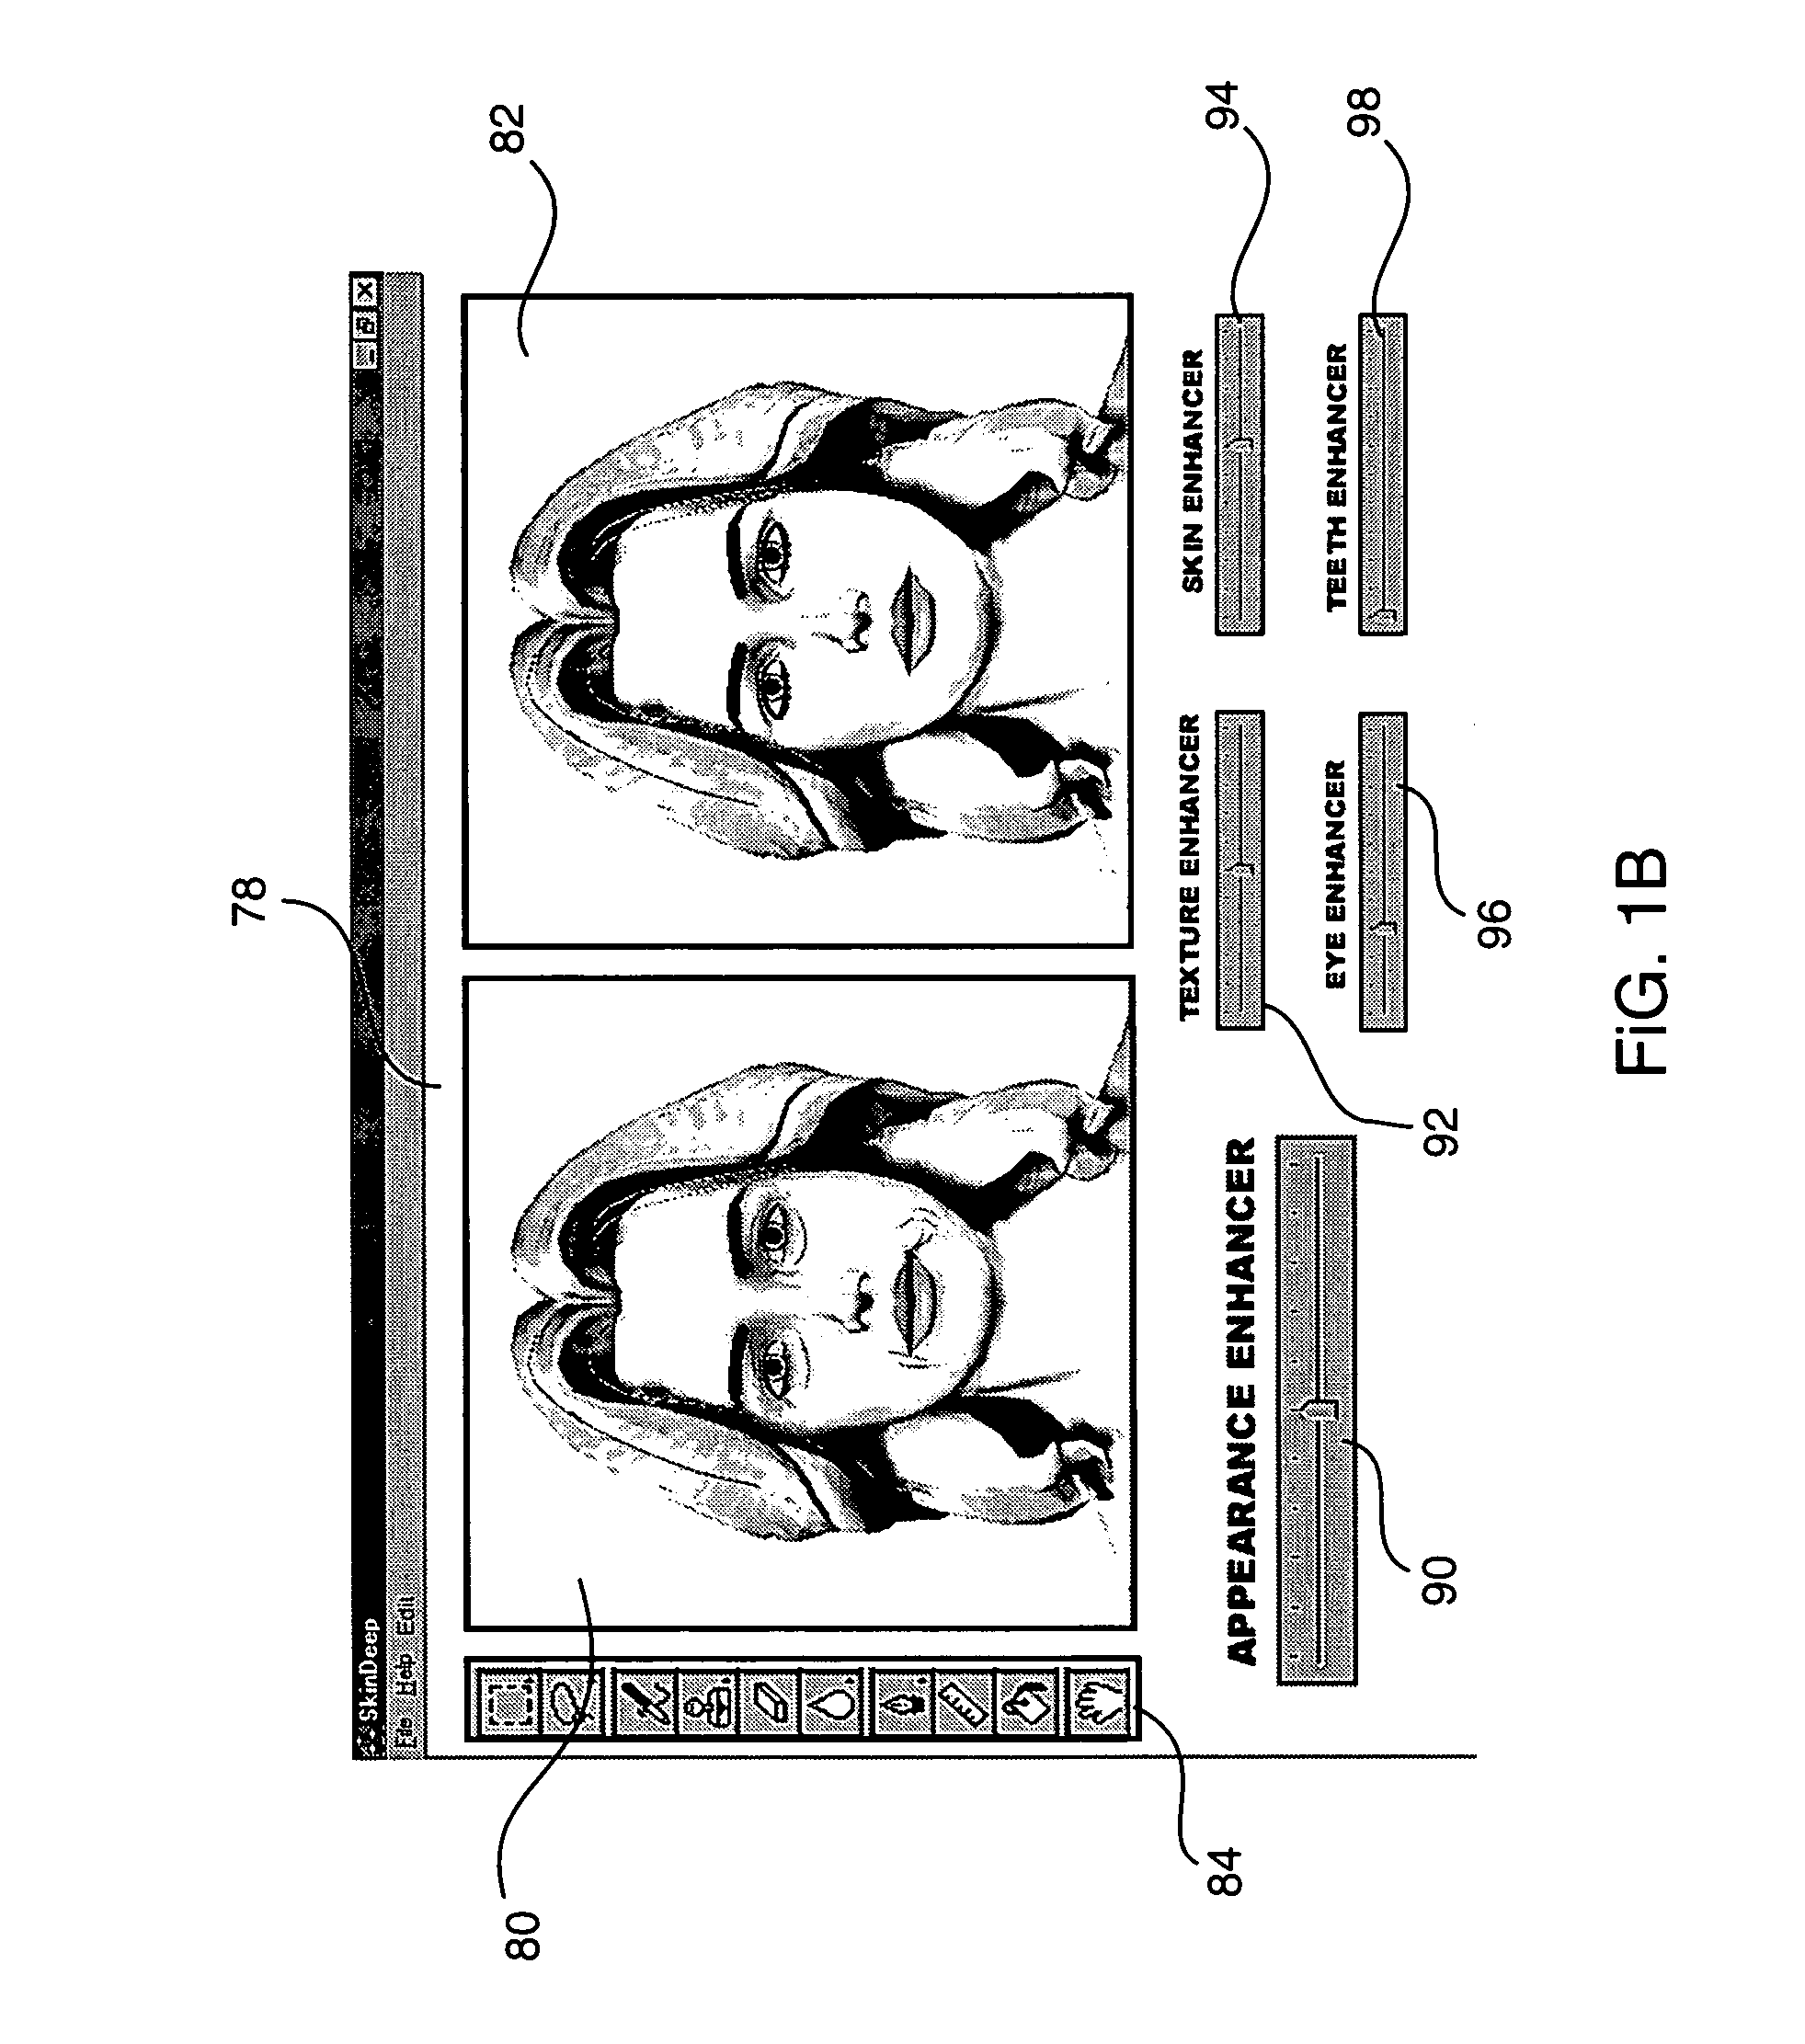 Method and system for enhancing portrait images that are processed in a batch mode